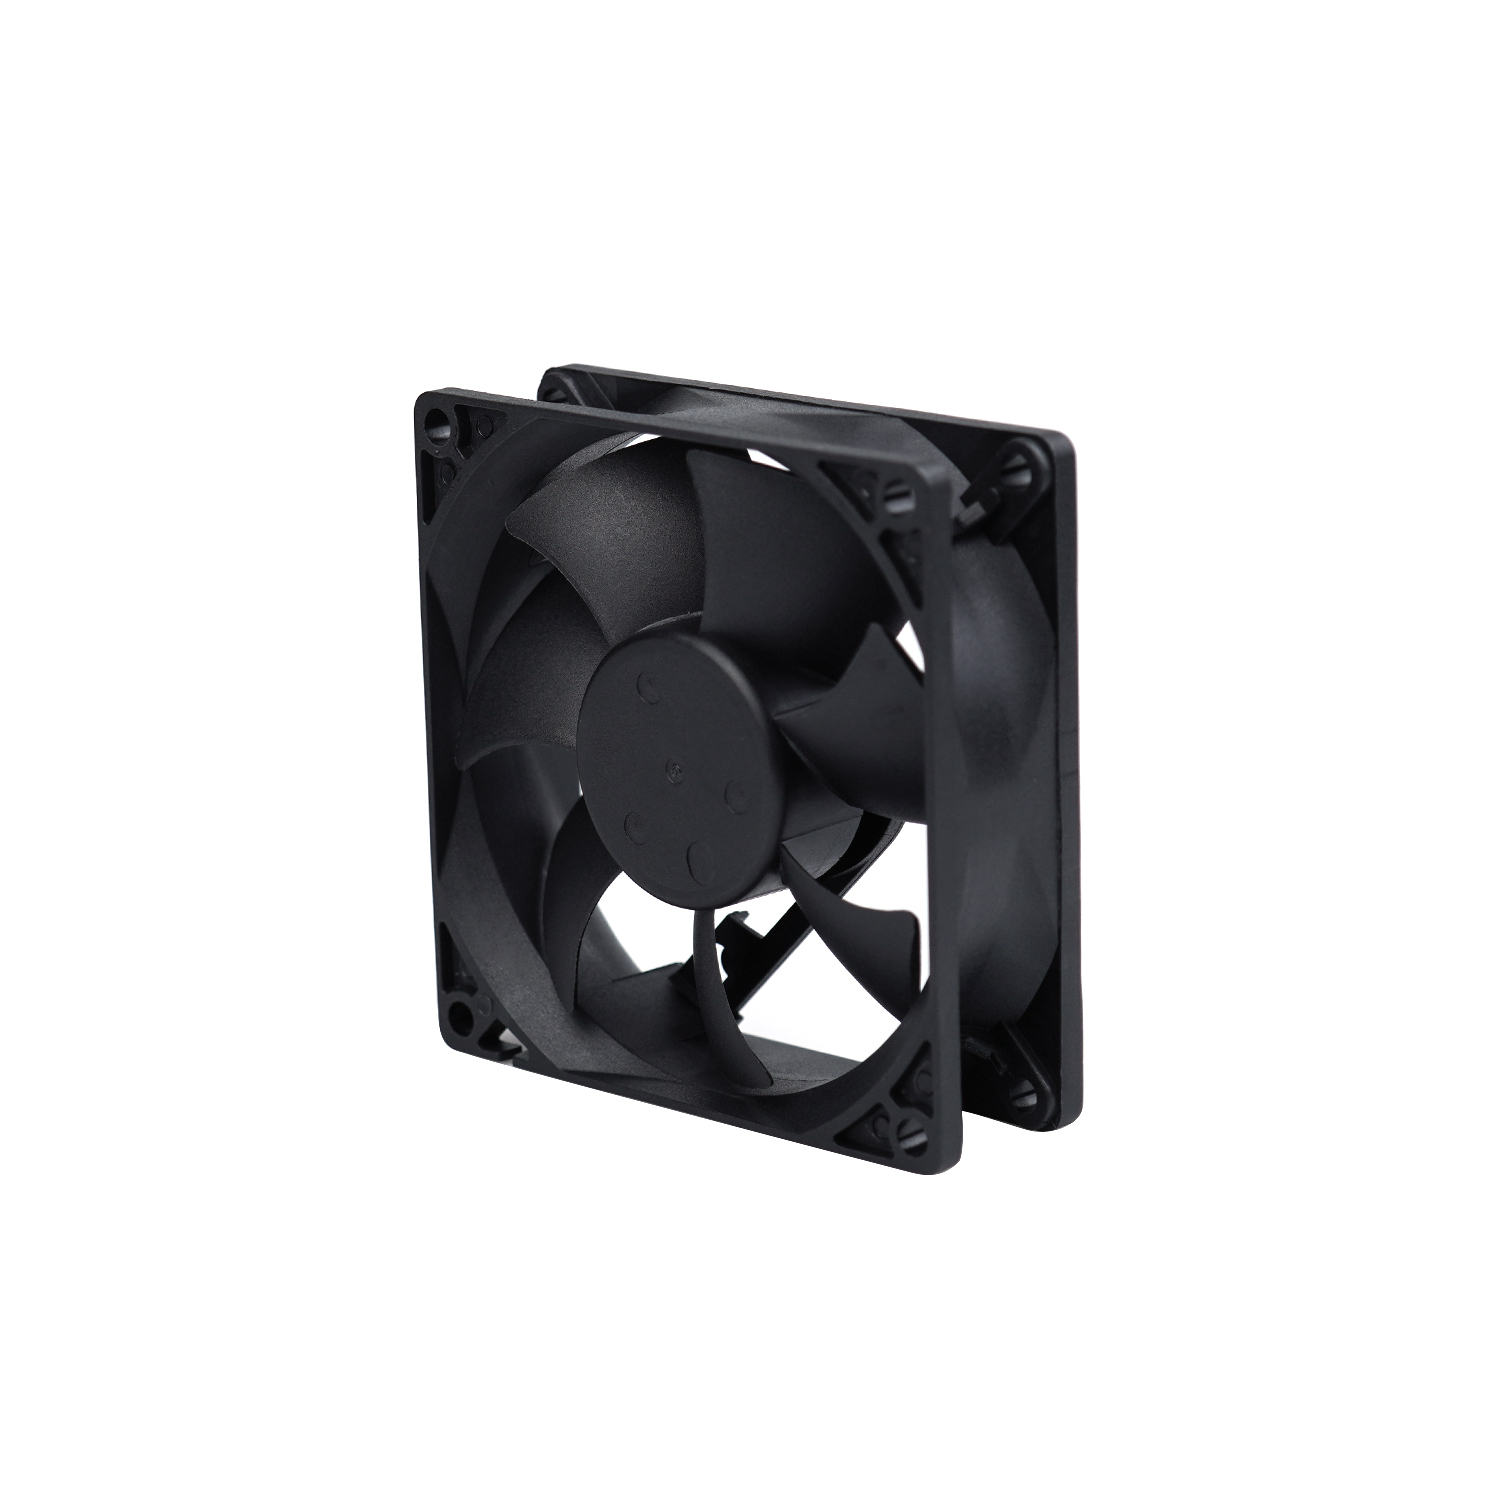 Impermeable 12V 24V 80x80mm Fan axial DC para coche